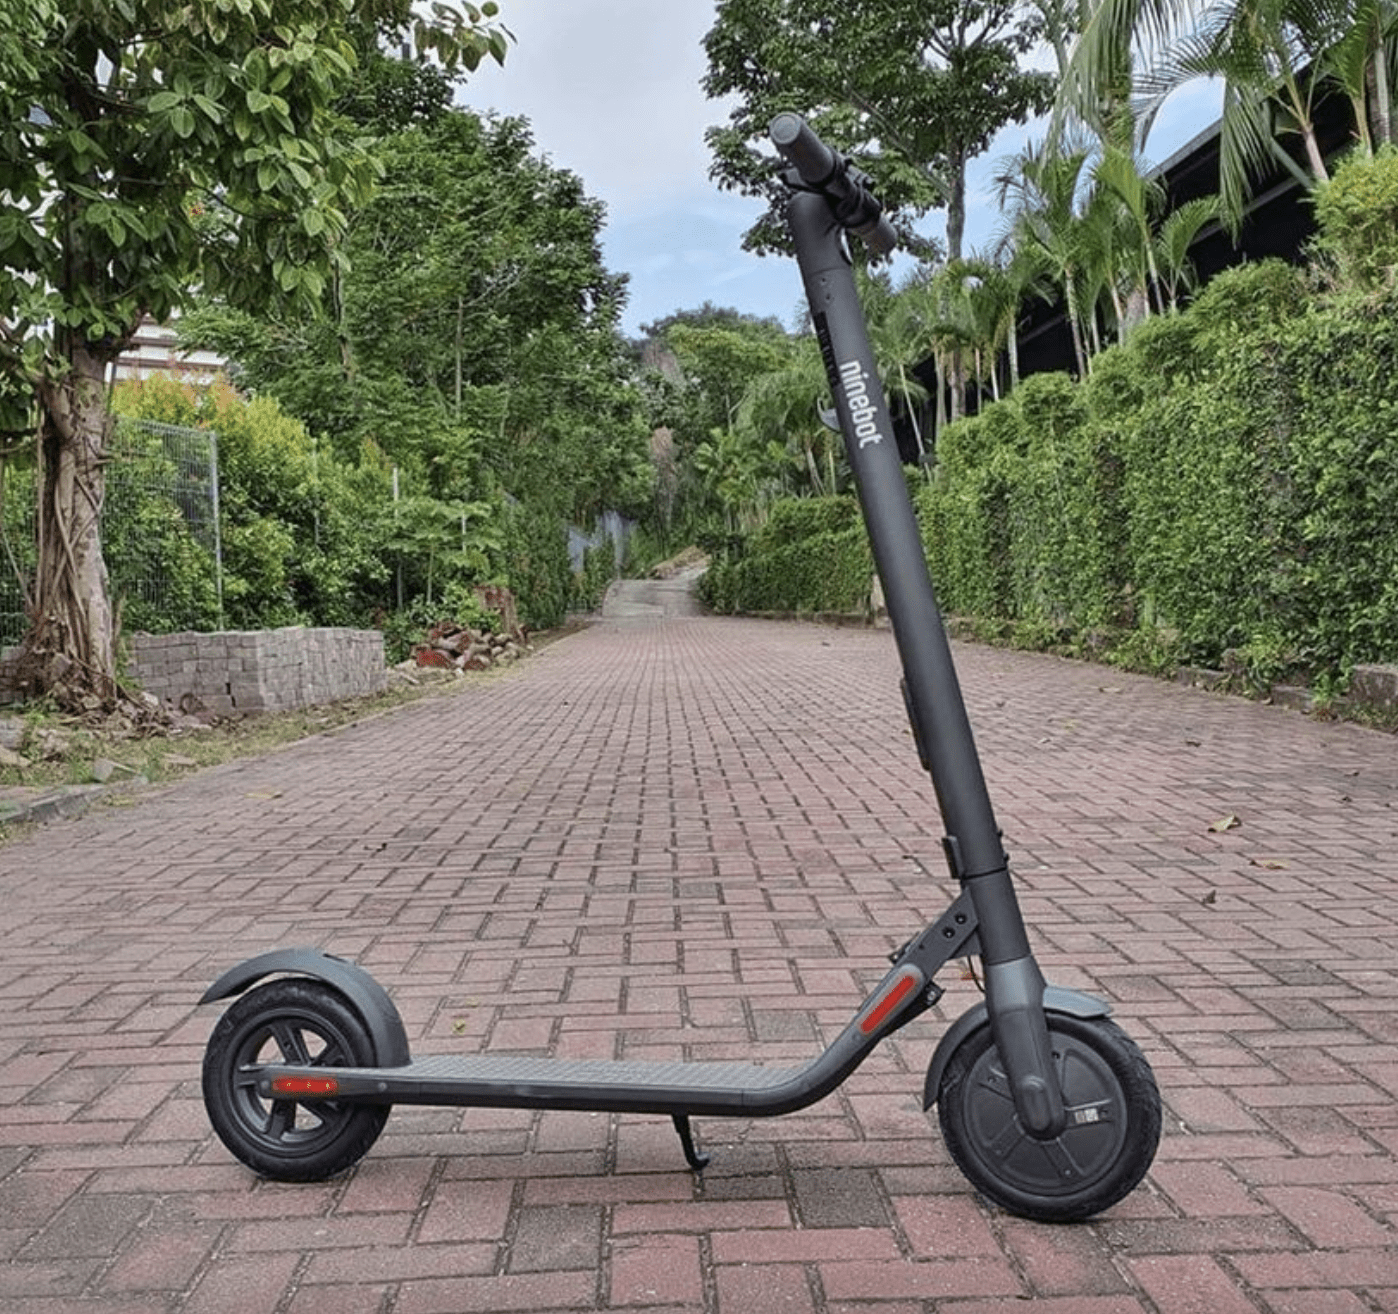 can a 14 year old ride an electric scooter in UK